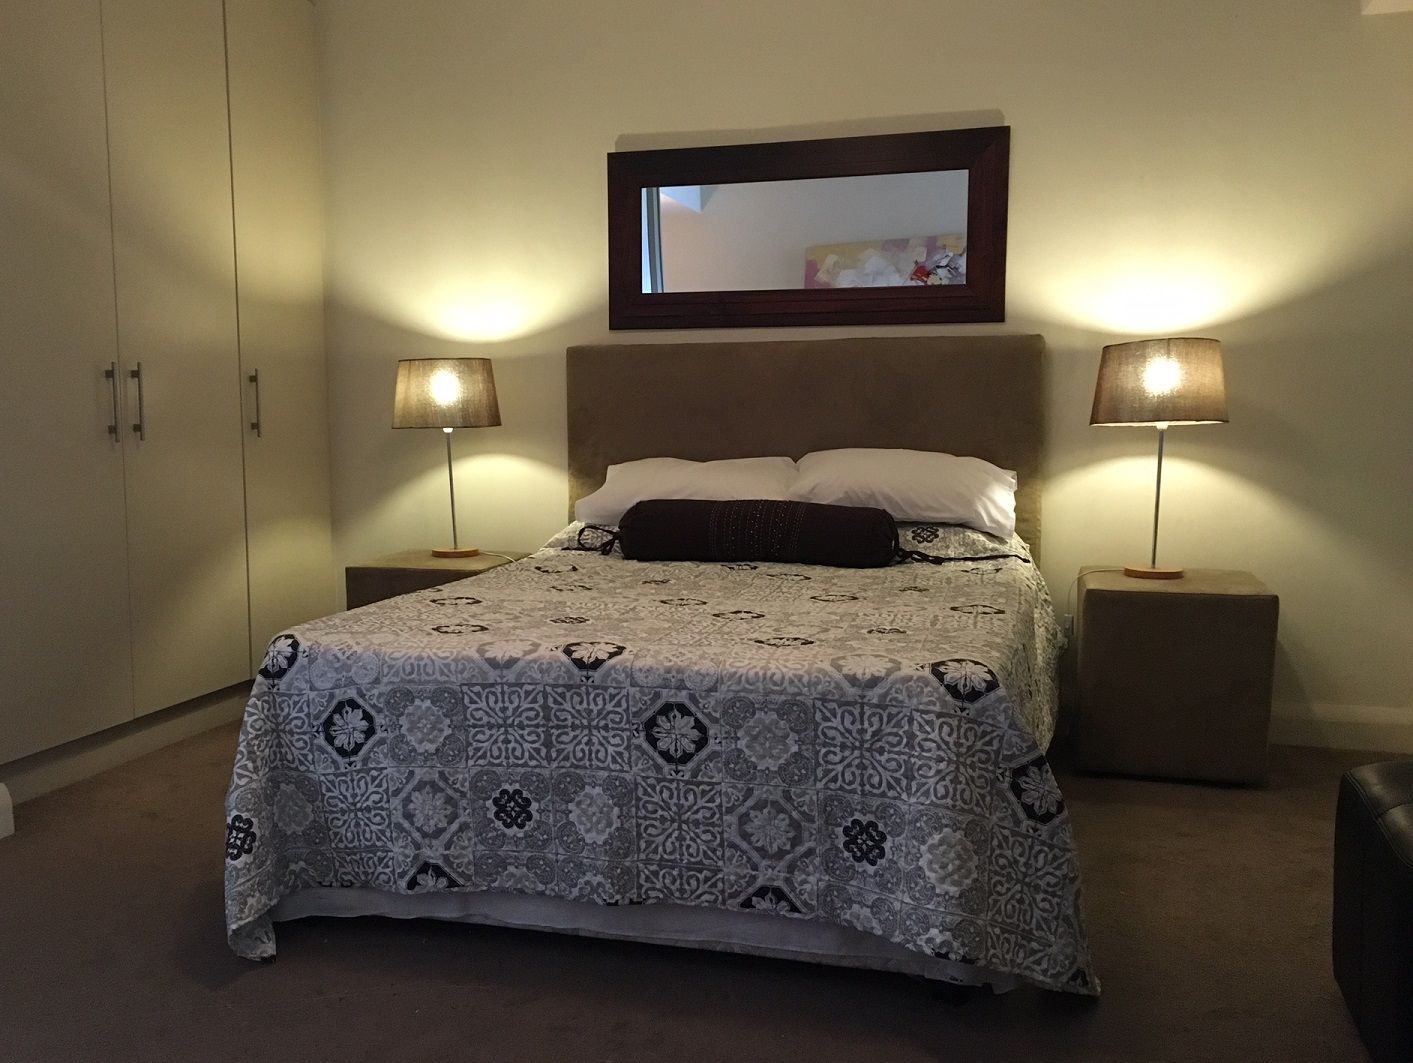 Photo 8 of Canal Chic accommodation in V&A Waterfront, Cape Town with 1 bedrooms and 1 bathrooms